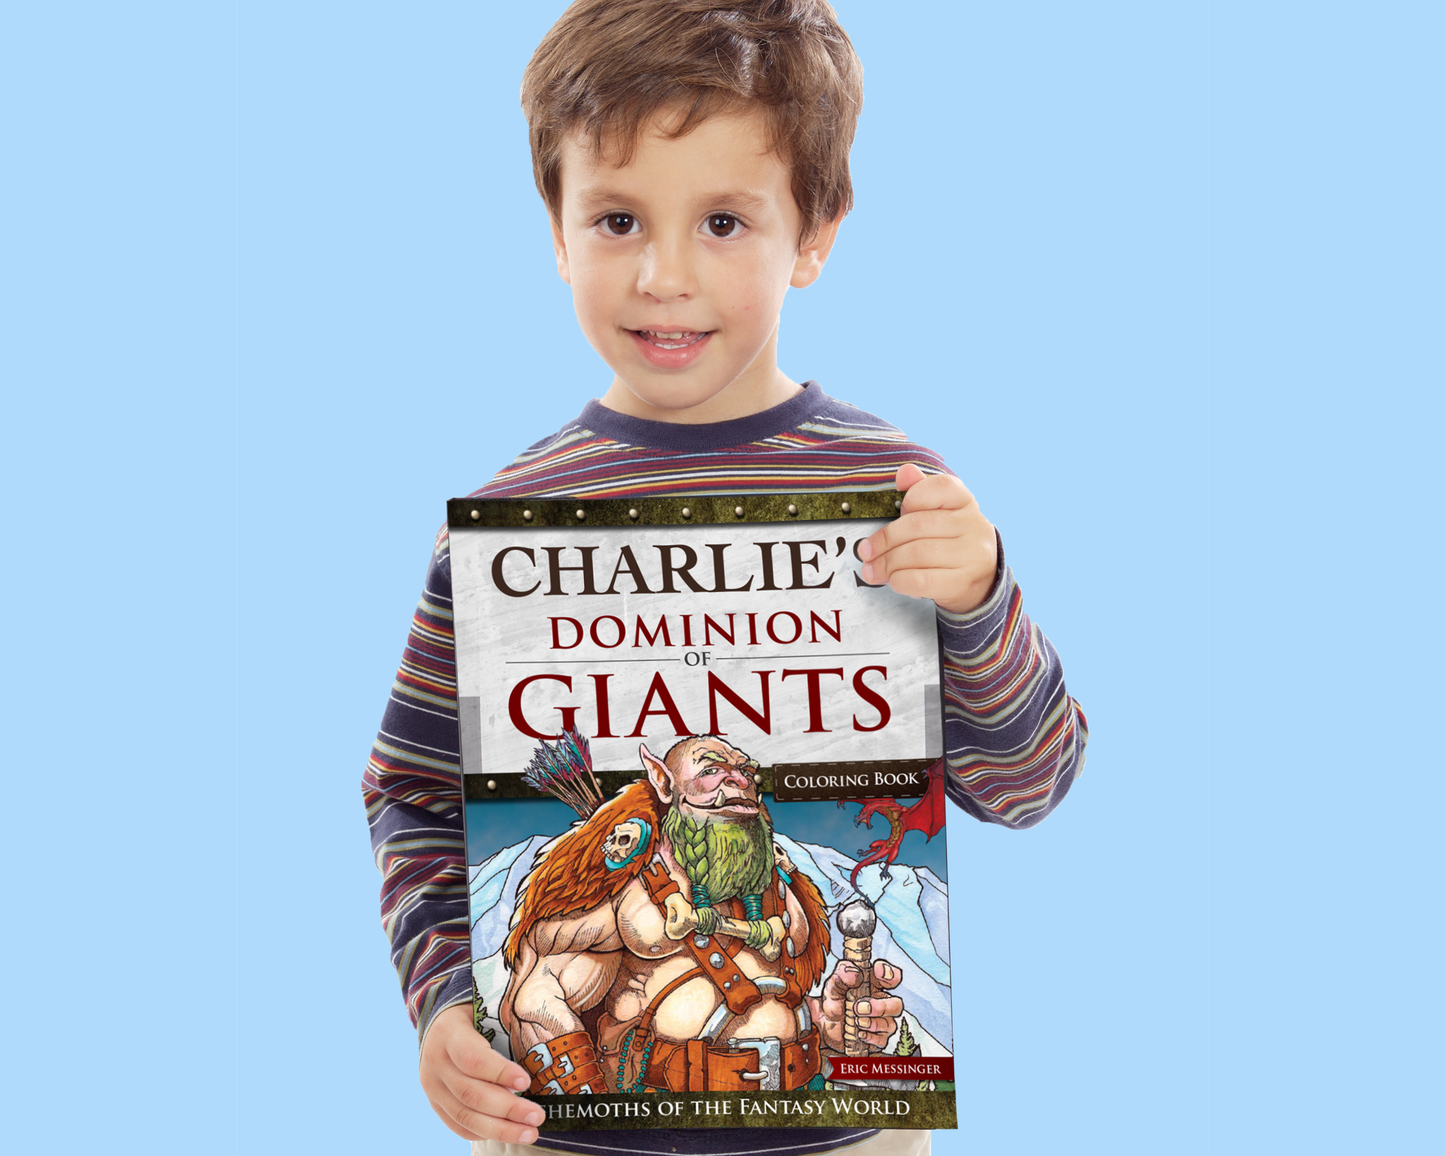 Dominion of Giants Coloring Book Customized